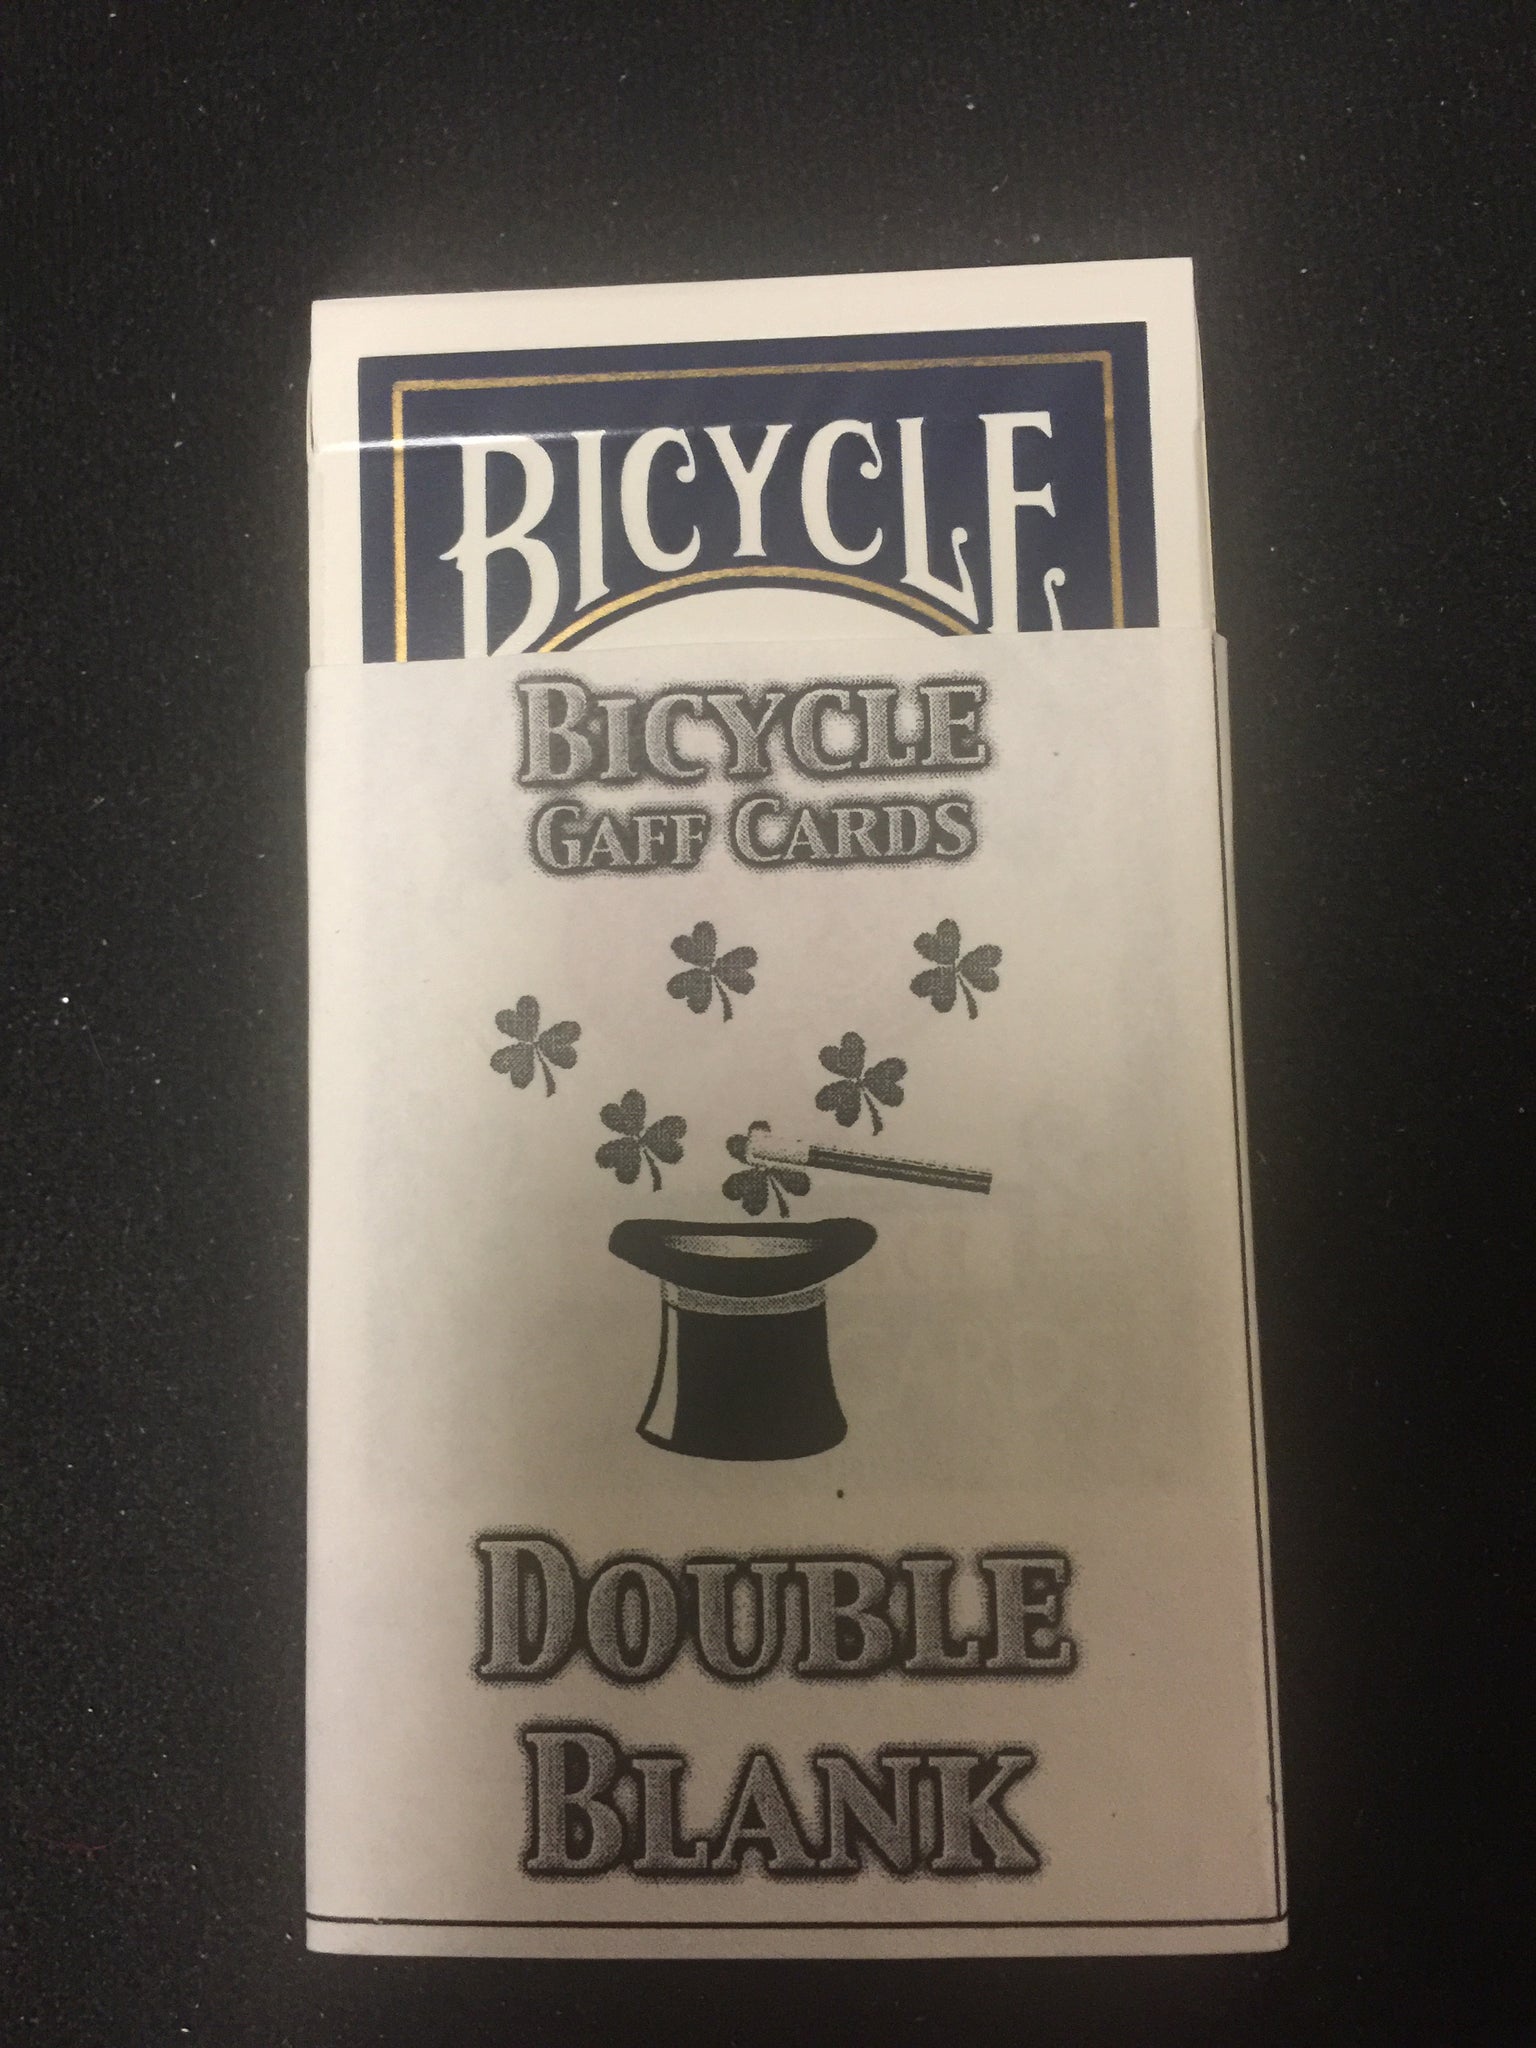 Double Blank Bicycle Cards gaff magic trick - Titan Magic & Brain Busters Escape Rooms